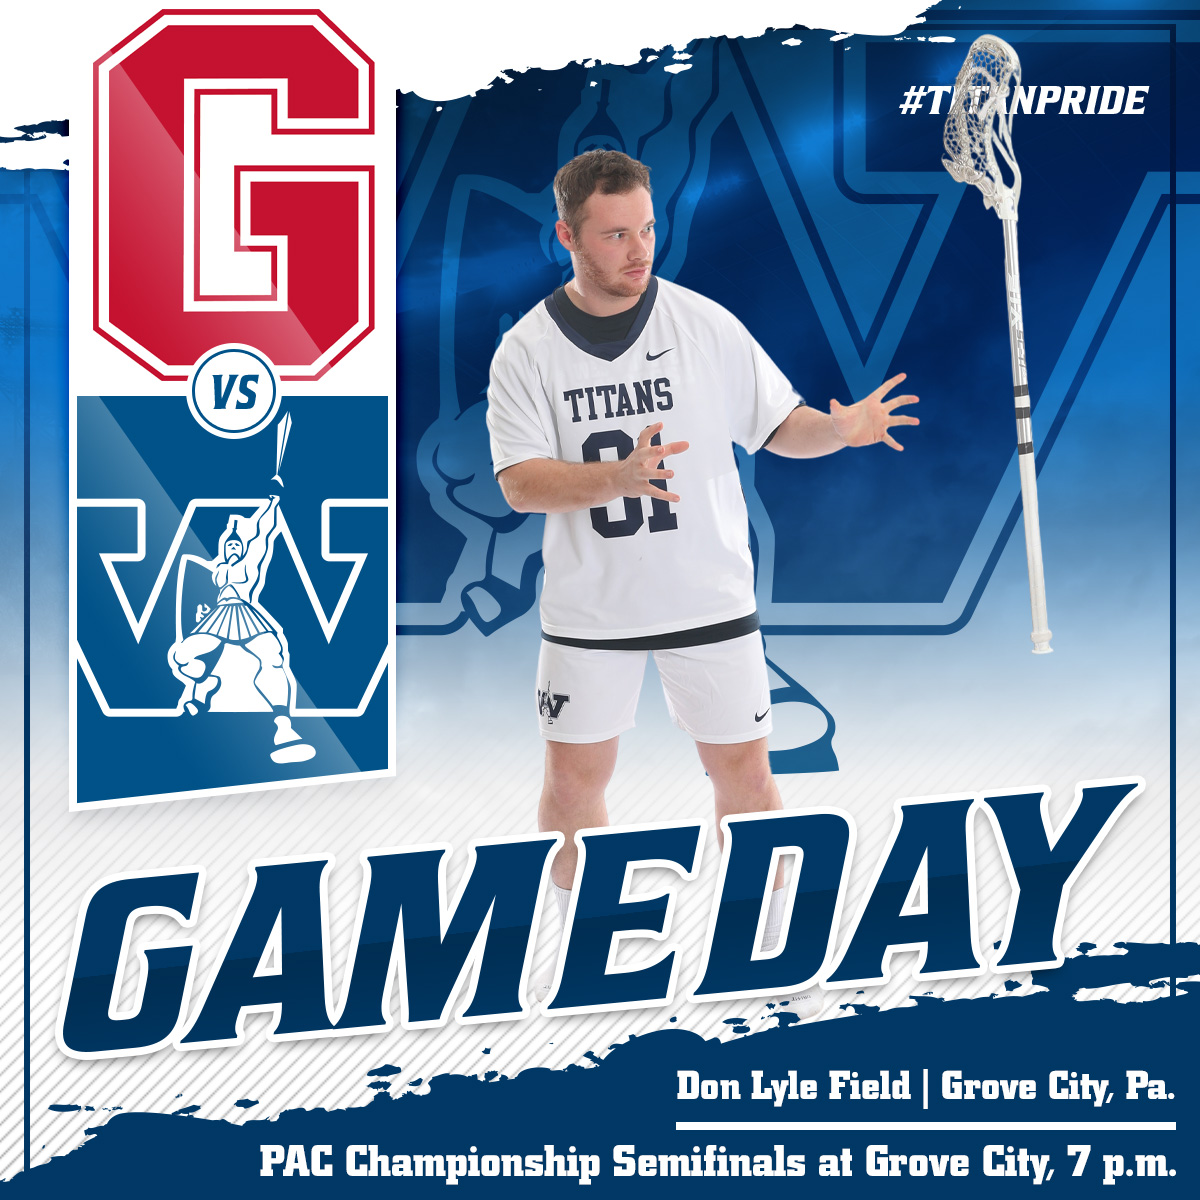 Men's lacrosse will travel to take on Grove City in the PAC Championship Semifinals at Don Lyle Field. Good luck Titans!

🆚Grove City
🕖7 p.m.
📍Grove City, Pa.
📺vimeo.com/showcase/10978…

#d3mlax #pacmlax #titanpride⚔️